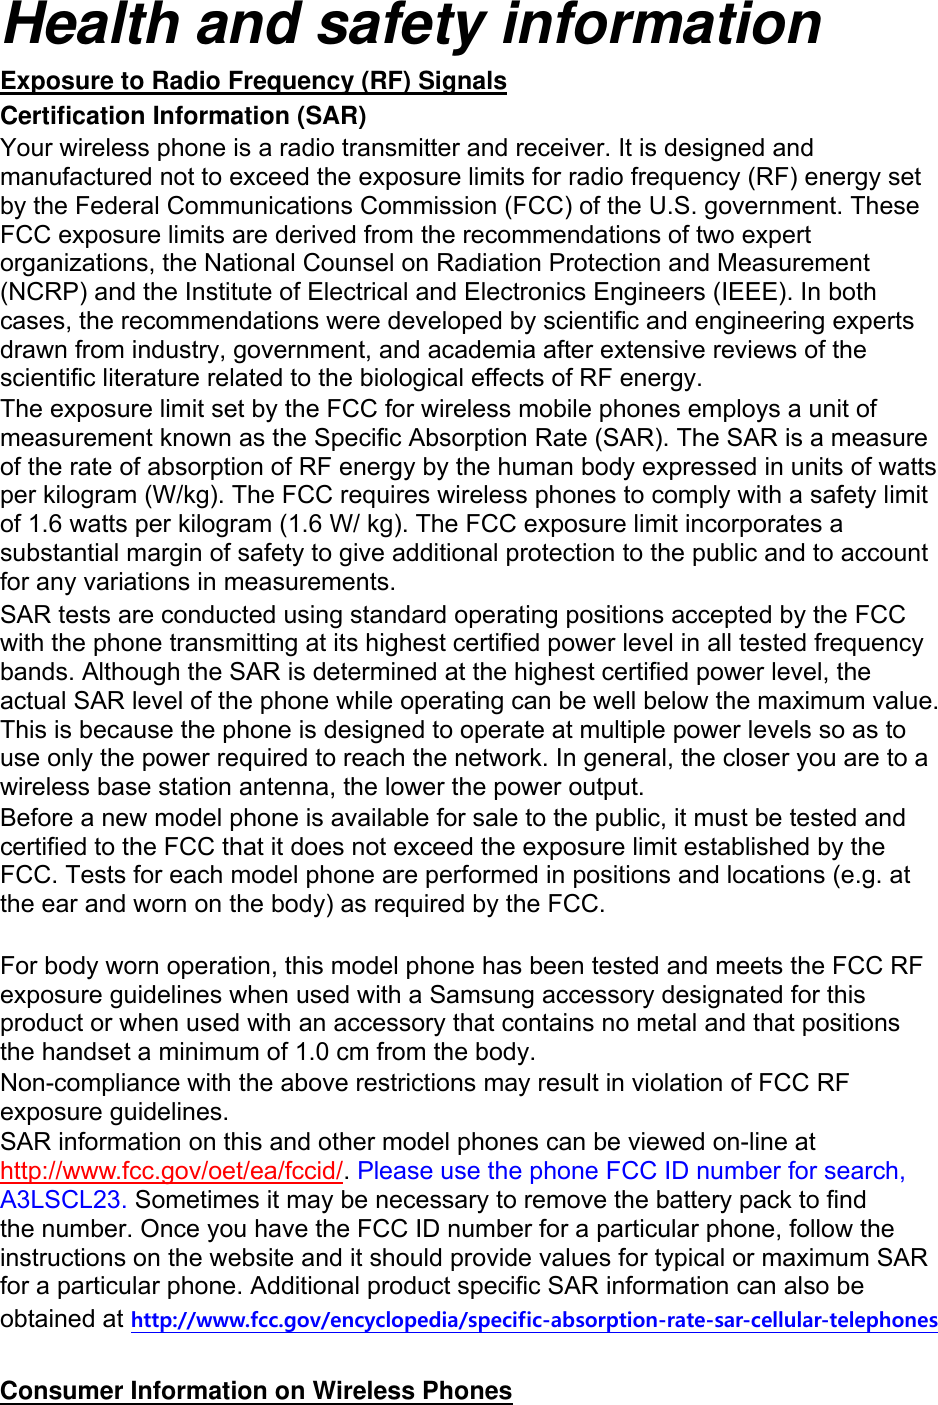 Health and safety information Exposure to Radio Frequency (RF) Signals Certification Information (SAR) Your wireless phone is a radio transmitter and receiver. It is designed and manufactured not to exceed the exposure limits for radio frequency (RF) energy set by the Federal Communications Commission (FCC) of the U.S. government. These FCC exposure limits are derived from the recommendations of two expert organizations, the National Counsel on Radiation Protection and Measurement (NCRP) and the Institute of Electrical and Electronics Engineers (IEEE). In both cases, the recommendations were developed by scientific and engineering experts drawn from industry, government, and academia after extensive reviews of the scientific literature related to the biological effects of RF energy. The exposure limit set by the FCC for wireless mobile phones employs a unit of measurement known as the Specific Absorption Rate (SAR). The SAR is a measure of the rate of absorption of RF energy by the human body expressed in units of watts per kilogram (W/kg). The FCC requires wireless phones to comply with a safety limit of 1.6 watts per kilogram (1.6 W/ kg). The FCC exposure limit incorporates a substantial margin of safety to give additional protection to the public and to account for any variations in measurements. SAR tests are conducted using standard operating positions accepted by the FCC with the phone transmitting at its highest certified power level in all tested frequency bands. Although the SAR is determined at the highest certified power level, the actual SAR level of the phone while operating can be well below the maximum value. This is because the phone is designed to operate at multiple power levels so as to use only the power required to reach the network. In general, the closer you are to a wireless base station antenna, the lower the power output. Before a new model phone is available for sale to the public, it must be tested and certified to the FCC that it does not exceed the exposure limit established by the FCC. Tests for each model phone are performed in positions and locations (e.g. at the ear and worn on the body) as required by the FCC.      For body worn operation, this model phone has been tested and meets the FCC RF exposure guidelines when used with a Samsung accessory designated for this product or when used with an accessory that contains no metal and that positions the handset a minimum of 1.0 cm from the body.   Non-compliance with the above restrictions may result in violation of FCC RF exposure guidelines. SAR information on this and other model phones can be viewed on-line at http://www.fcc.gov/oet/ea/fccid/. Please use the phone FCC ID number for search, A3LSCL23. Sometimes it may be necessary to remove the battery pack to find the number. Once you have the FCC ID number for a particular phone, follow the instructions on the website and it should provide values for typical or maximum SAR for a particular phone. Additional product specific SAR information can also be obtained at http://www.fcc.gov/encyclopedia/specific-absorption-rate-sar-cellular-telephones  Consumer Information on Wireless Phones 